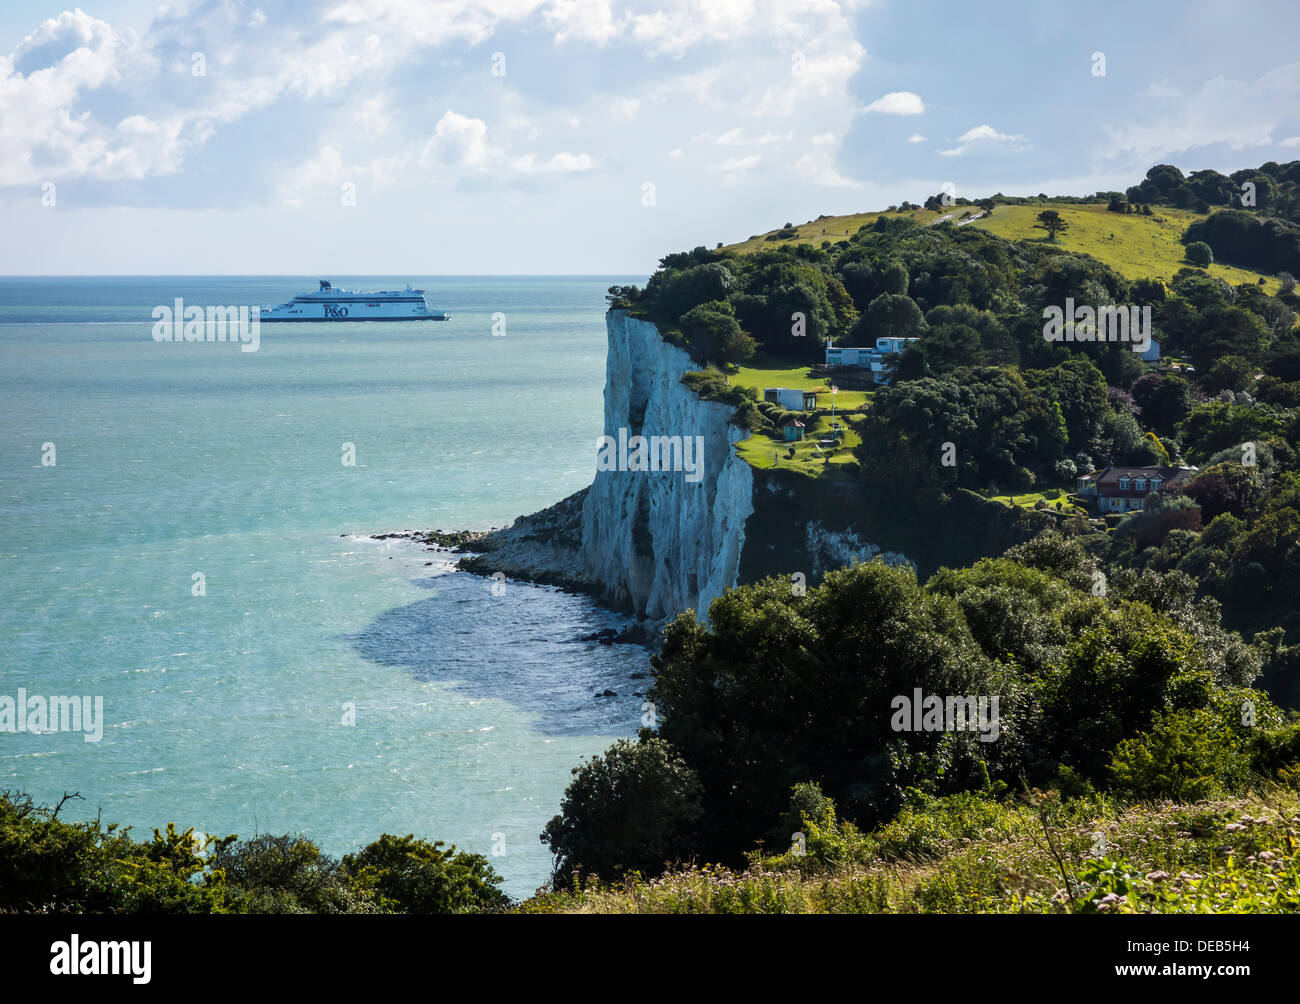 St Margarets Bay, Dover, English, Cross Channel, P&O Ferry heading into Dover Docks, Kent. The White Cliffs of Dover Stock Photo